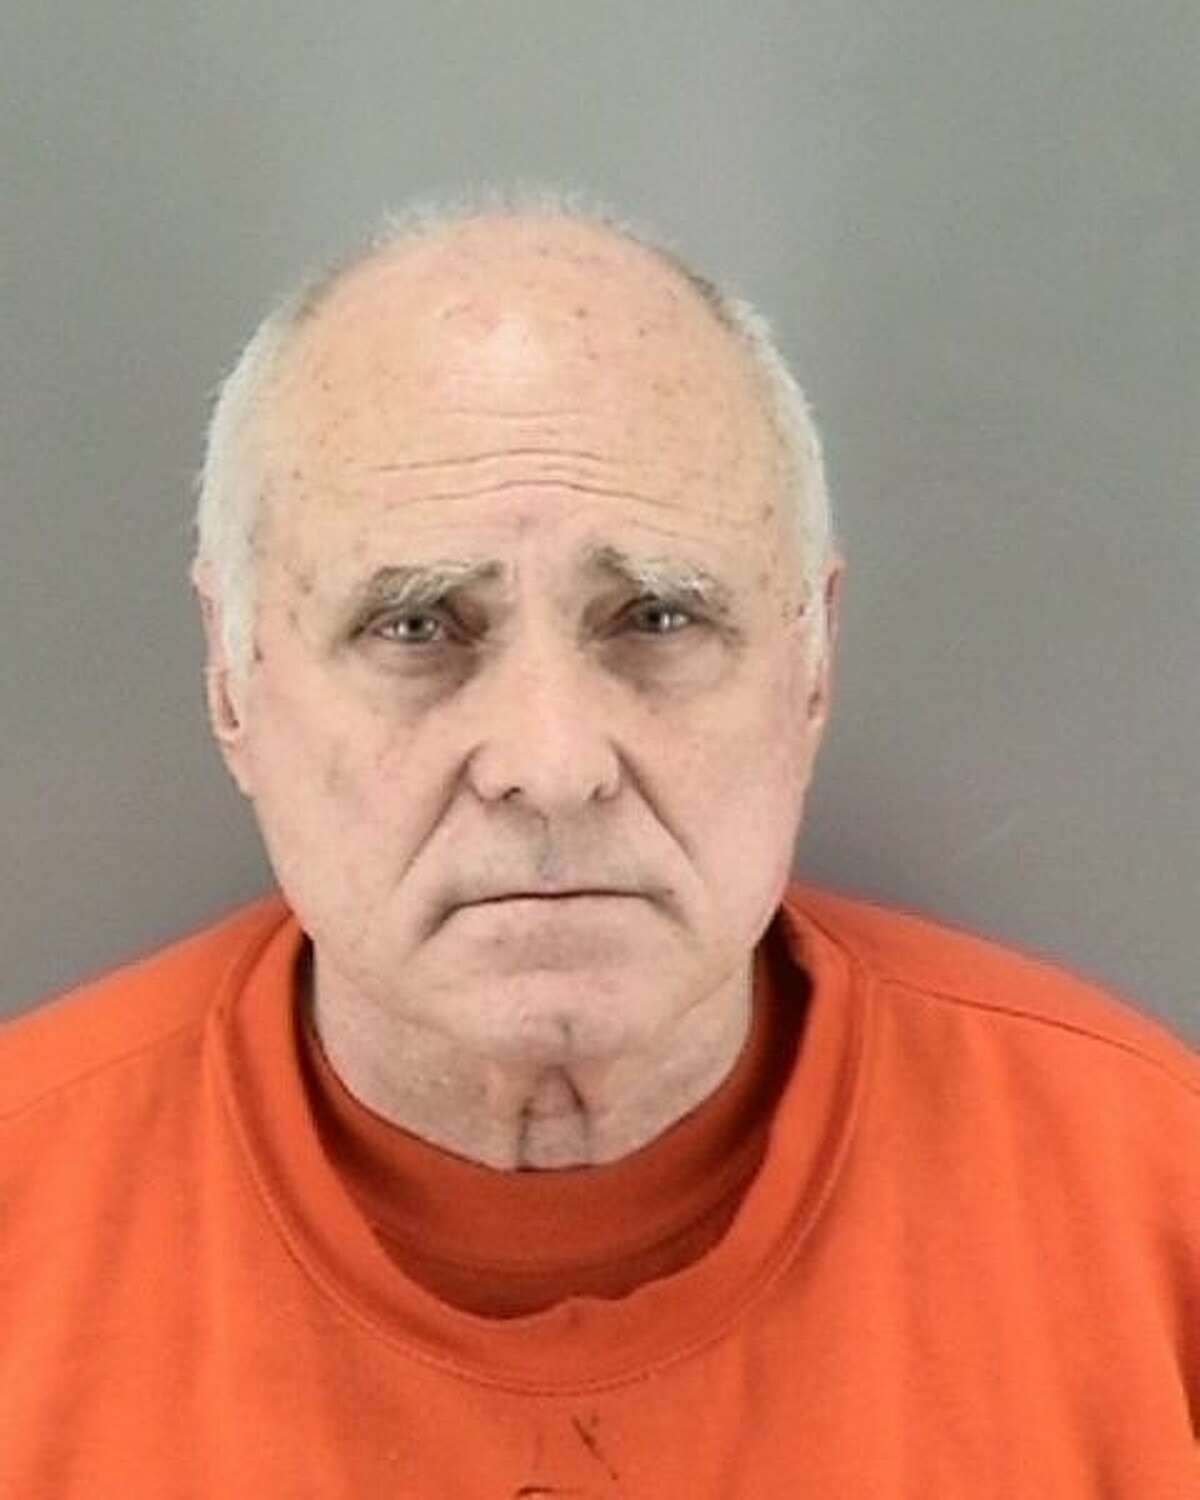 John Morrison, 71, was arrested Monday for possession of child pornography.